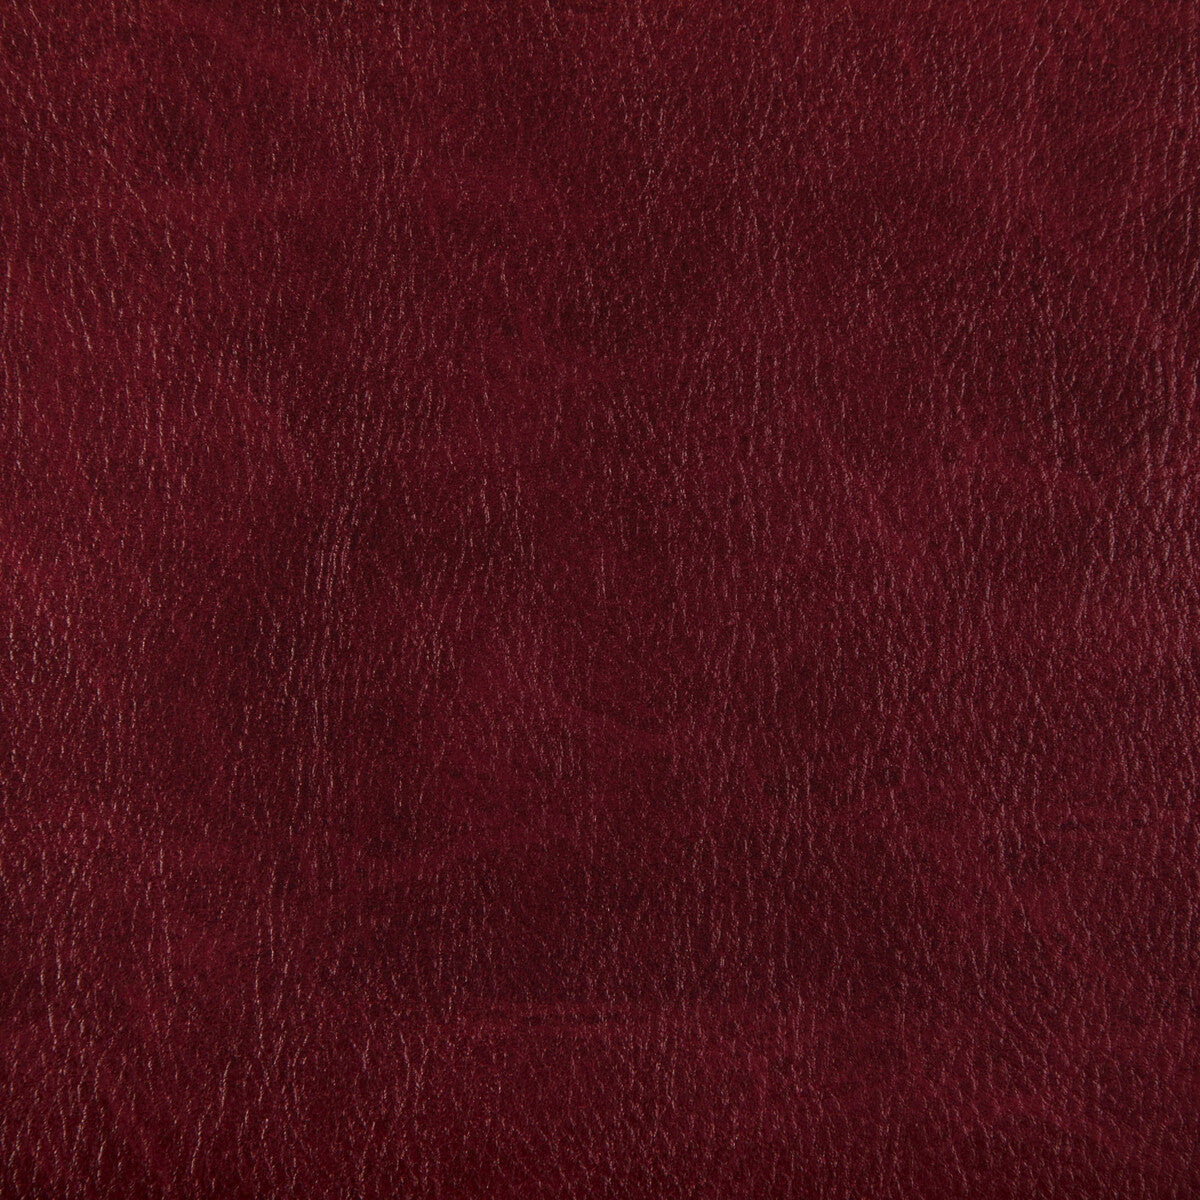 Toni fabric in sangria color - pattern TONI.9.0 - by Kravet Contract